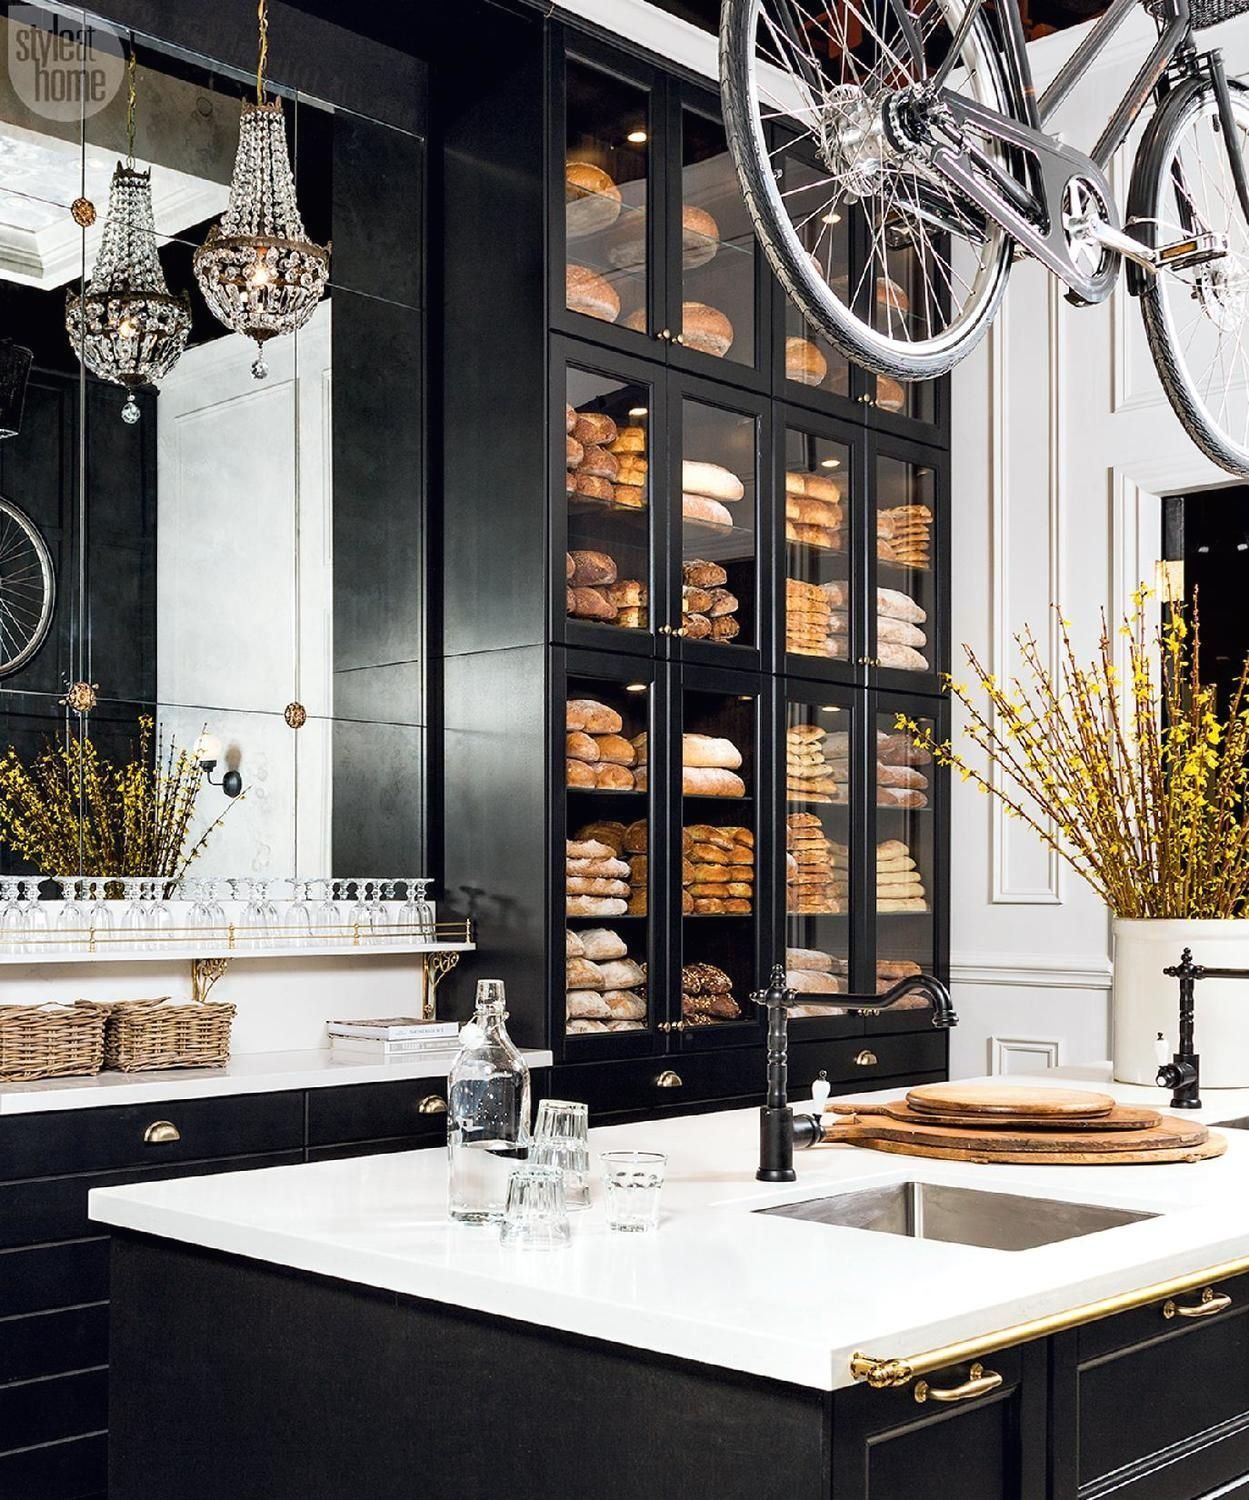 Parisian Charm: Designing Spaces Inspired By The City Of Love